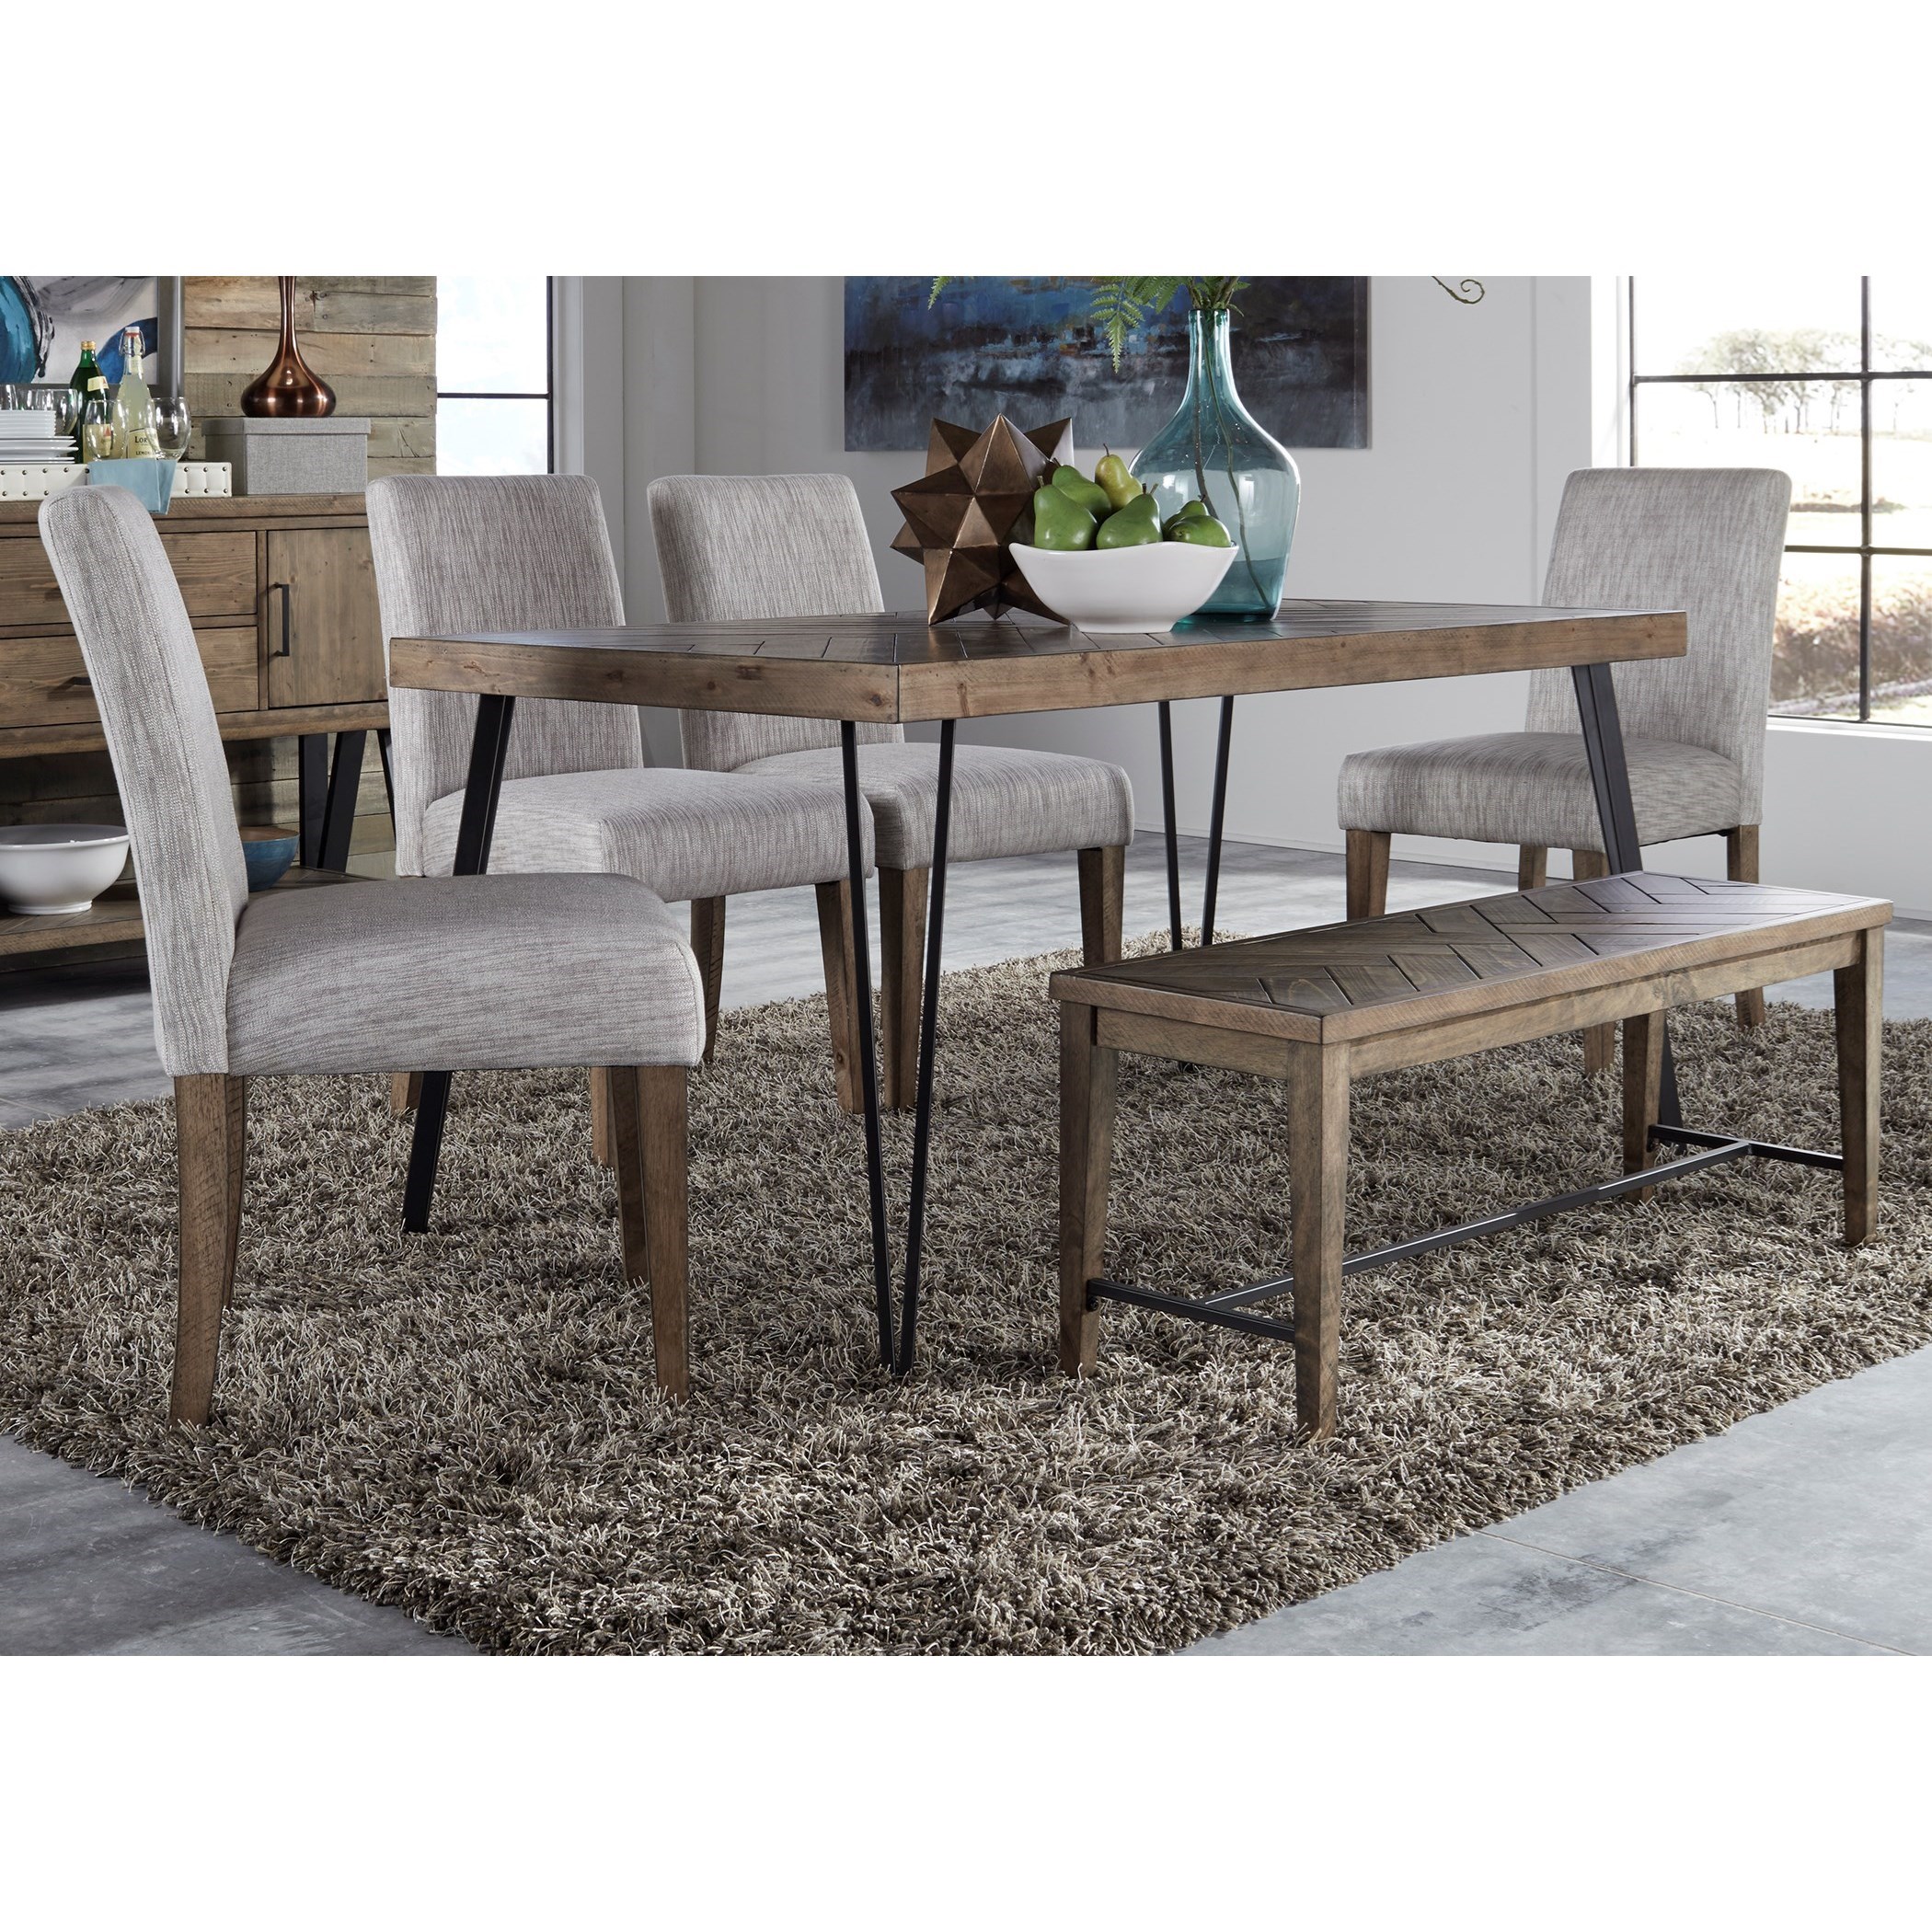 vendor horizons contemporary table and upholstered products liberty furniture color threshold parquet accent chair set with bench unique drawer pulls pork pie drum throne corner